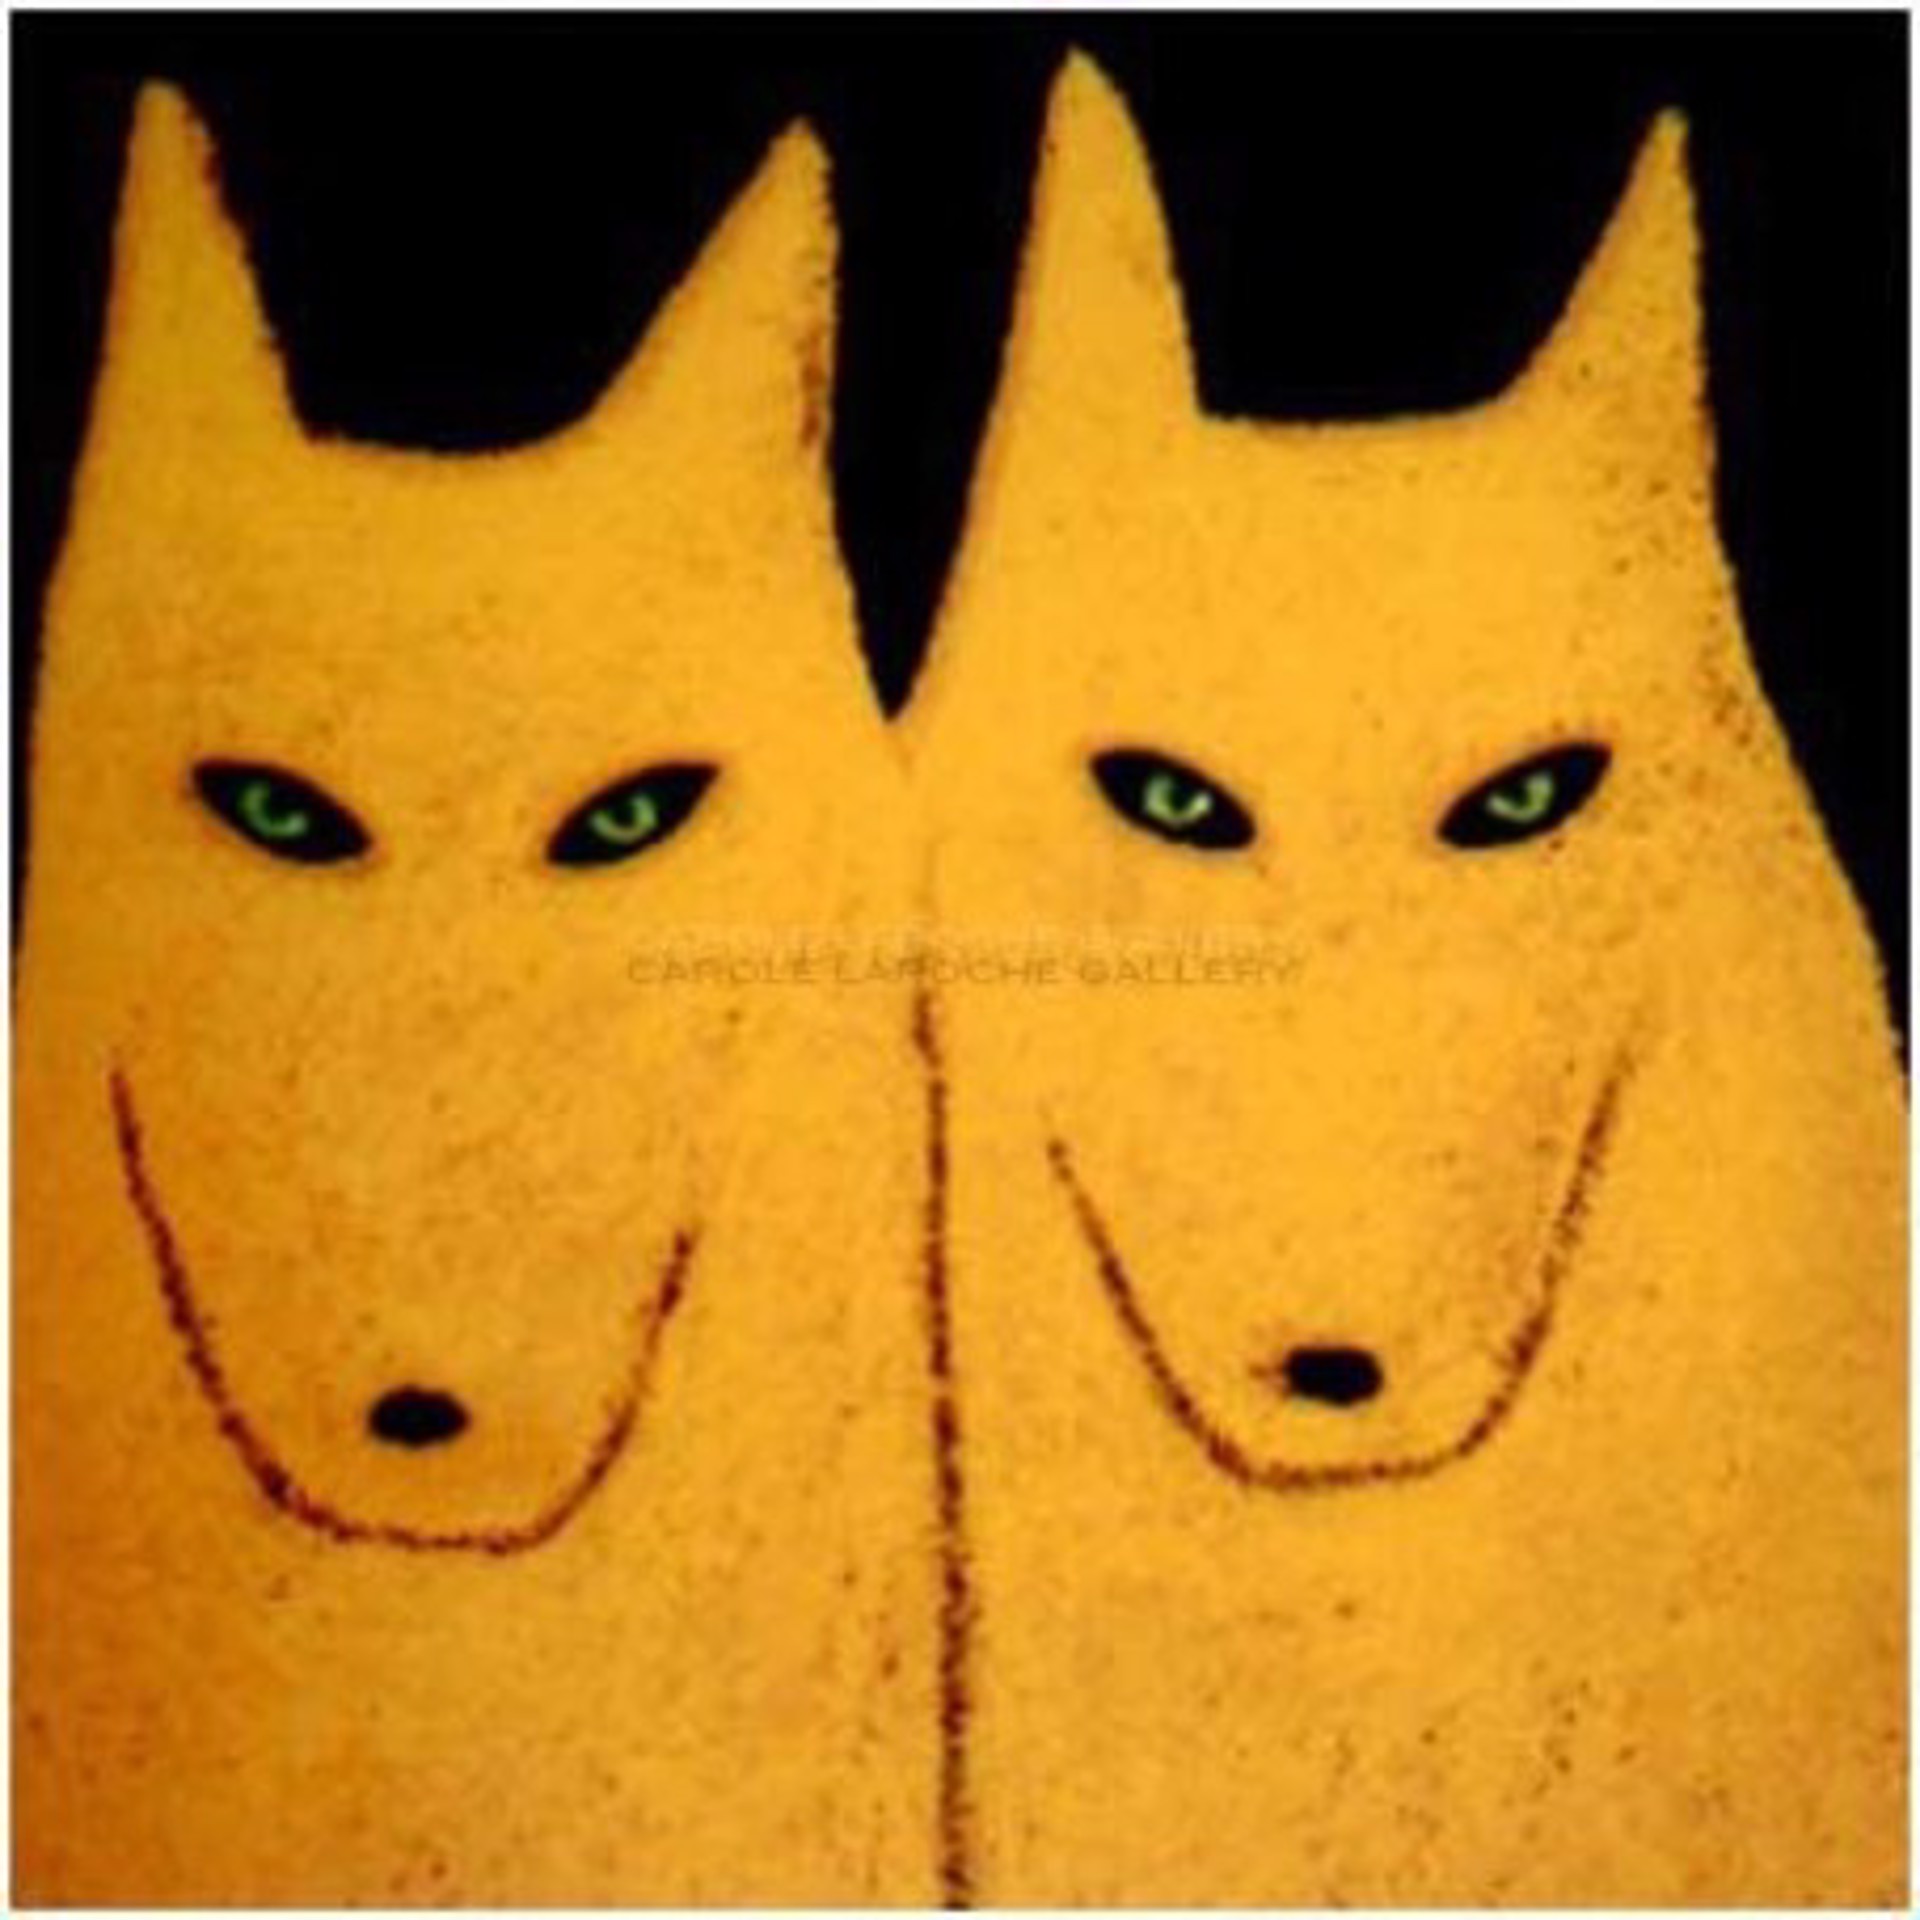 Two Yellow Wolves by Carole LaRoche